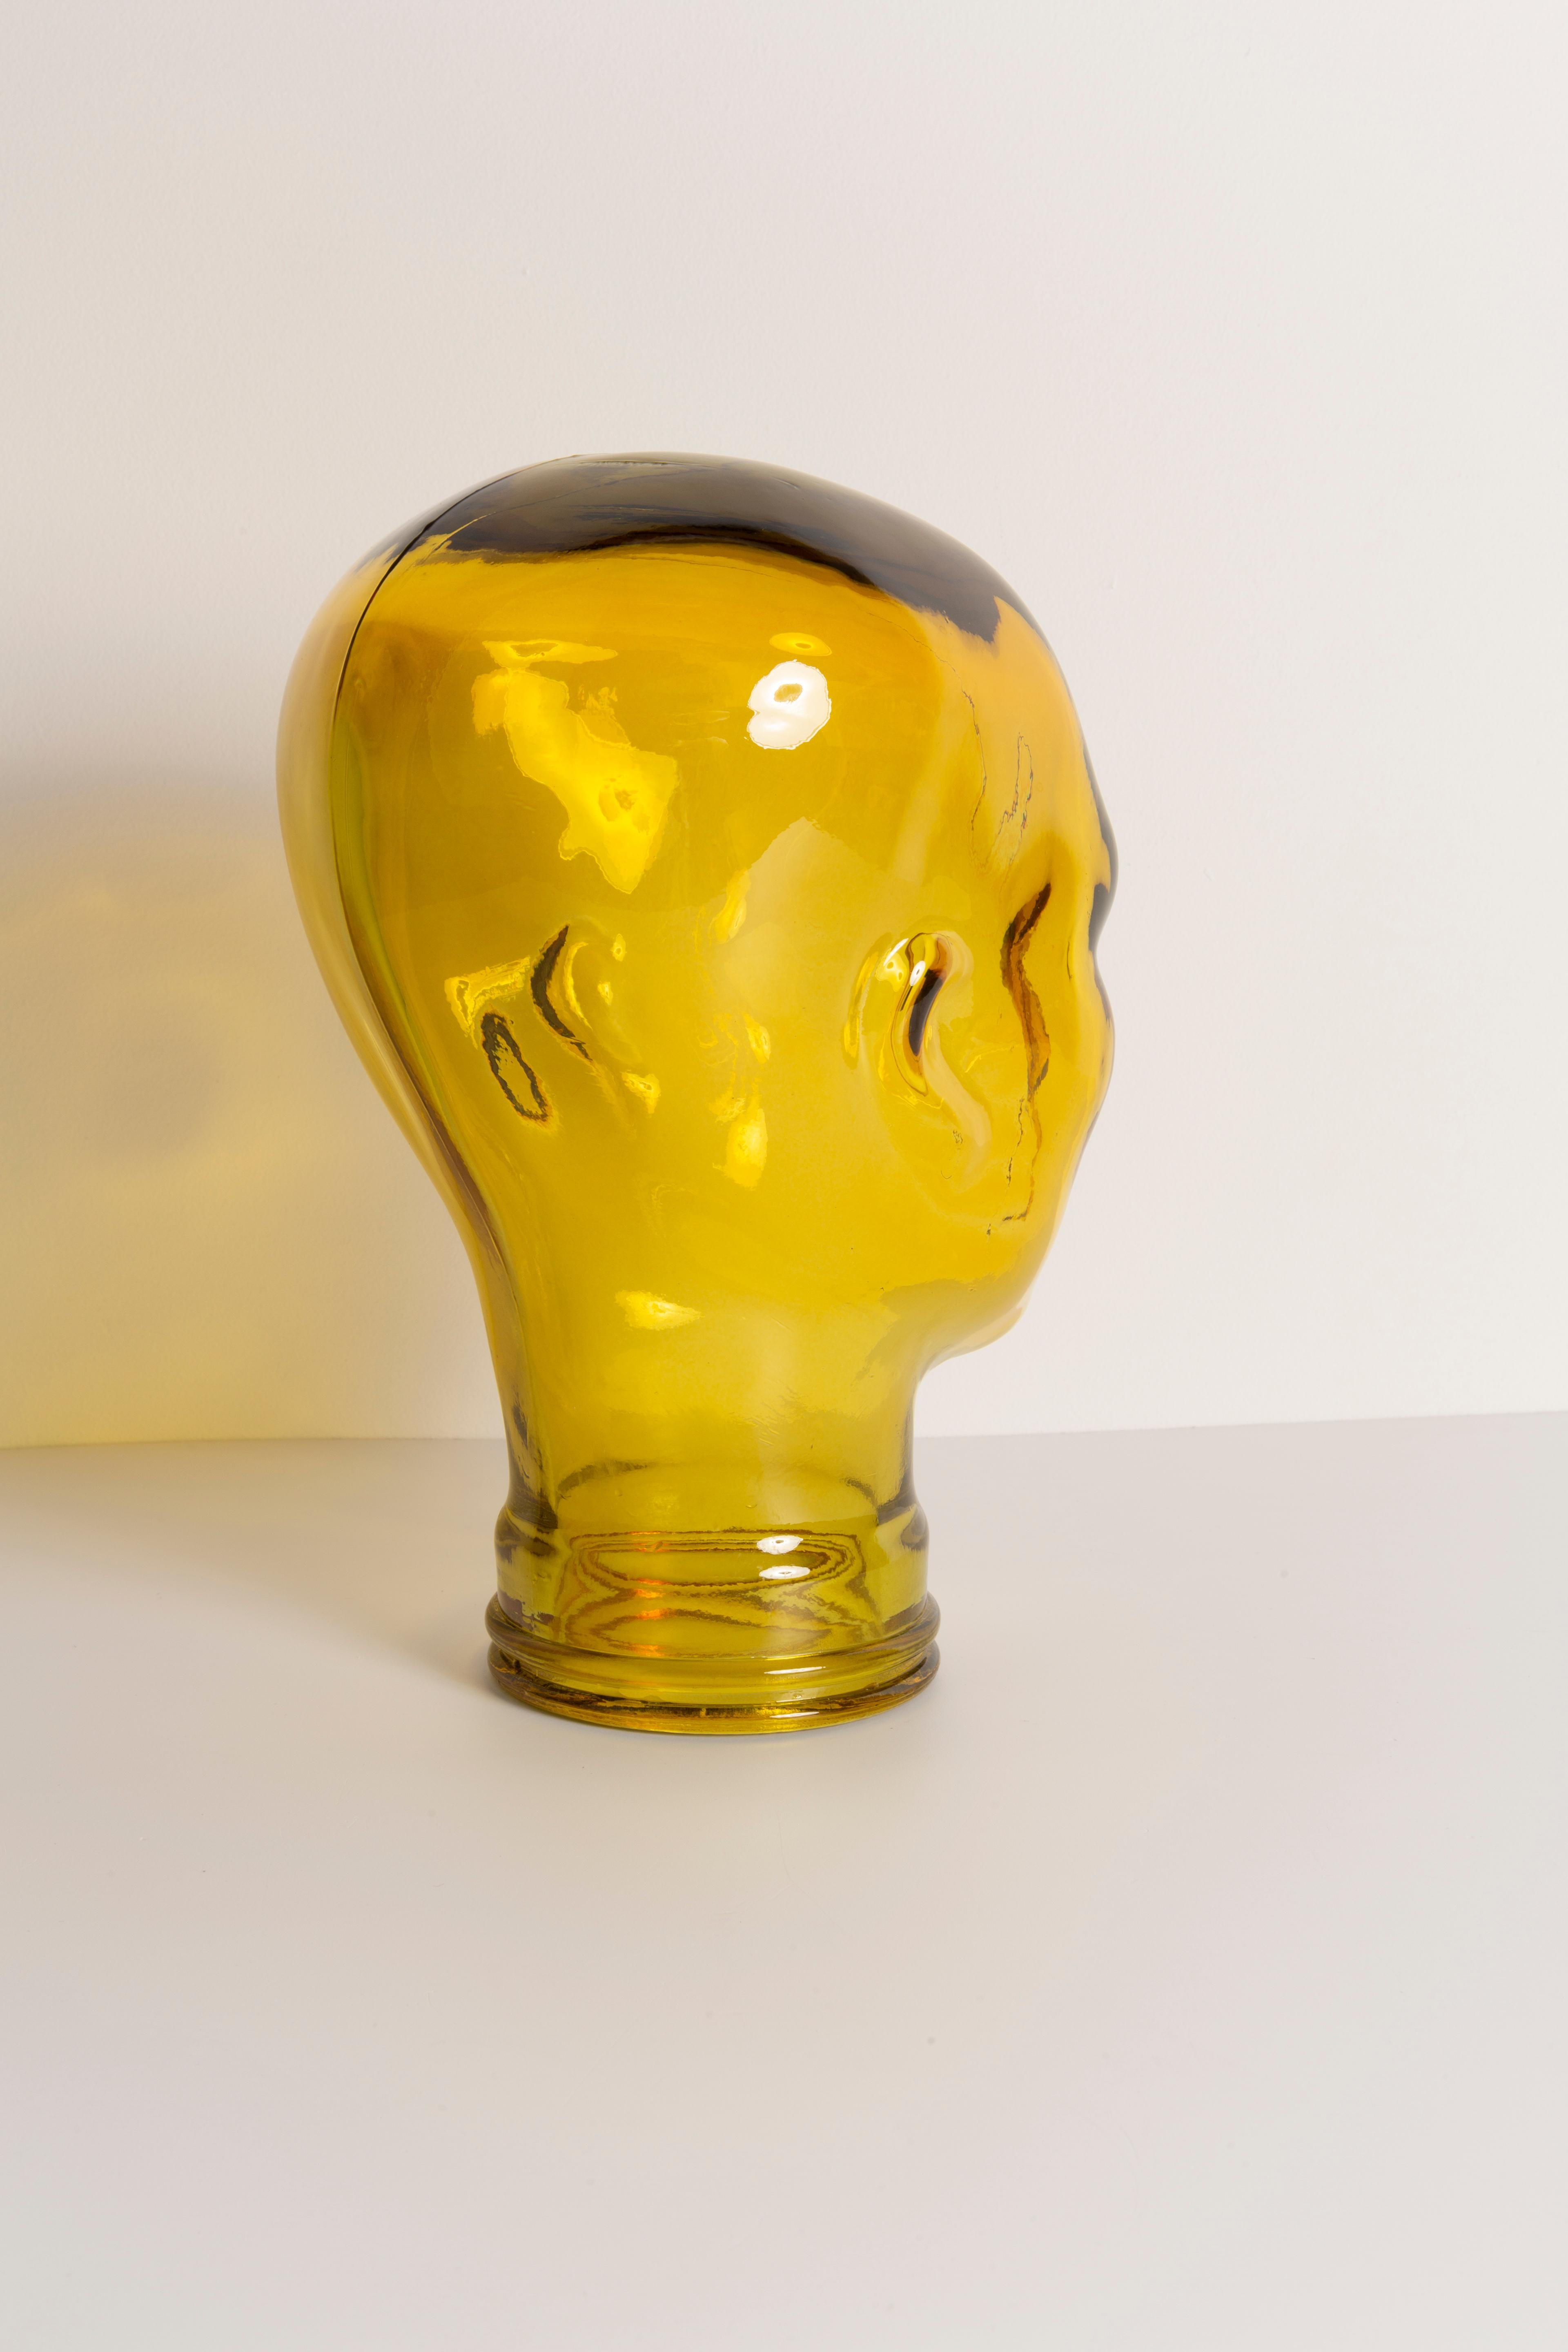 Mid-Century Modern Yellow Vintage Decorative Mannequin Glass Head Sculpture, 1970s, Germany For Sale